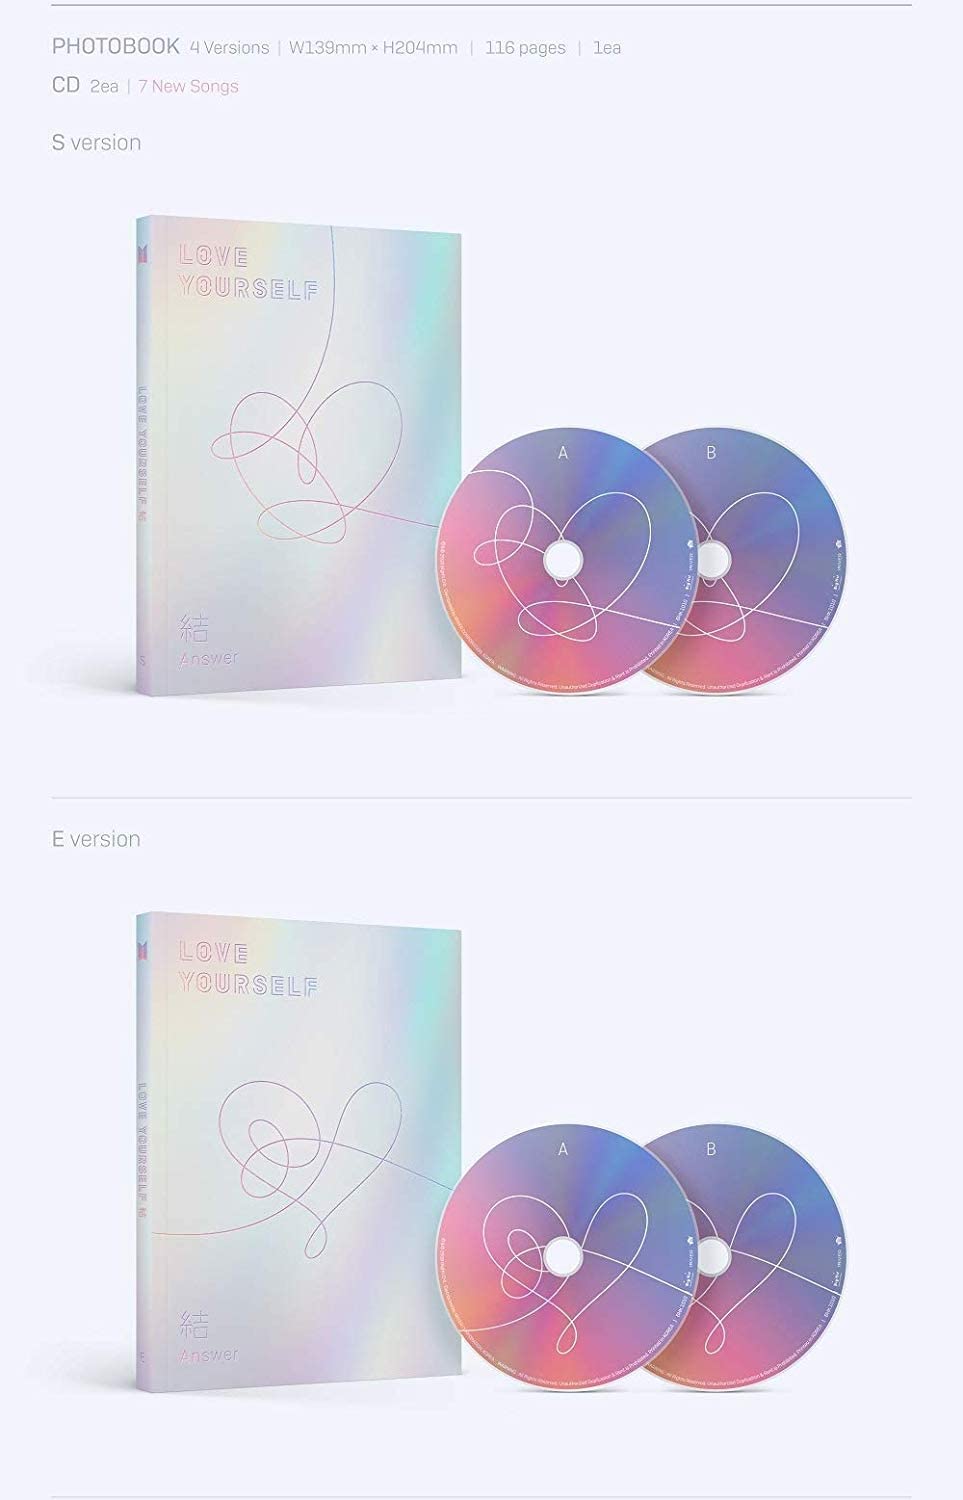 2 CD
1 Photo Book (116 pages)
1 Mini Book (20 pages)
1 Photo Card (random out of 28 pages)
1 Sticker Pack